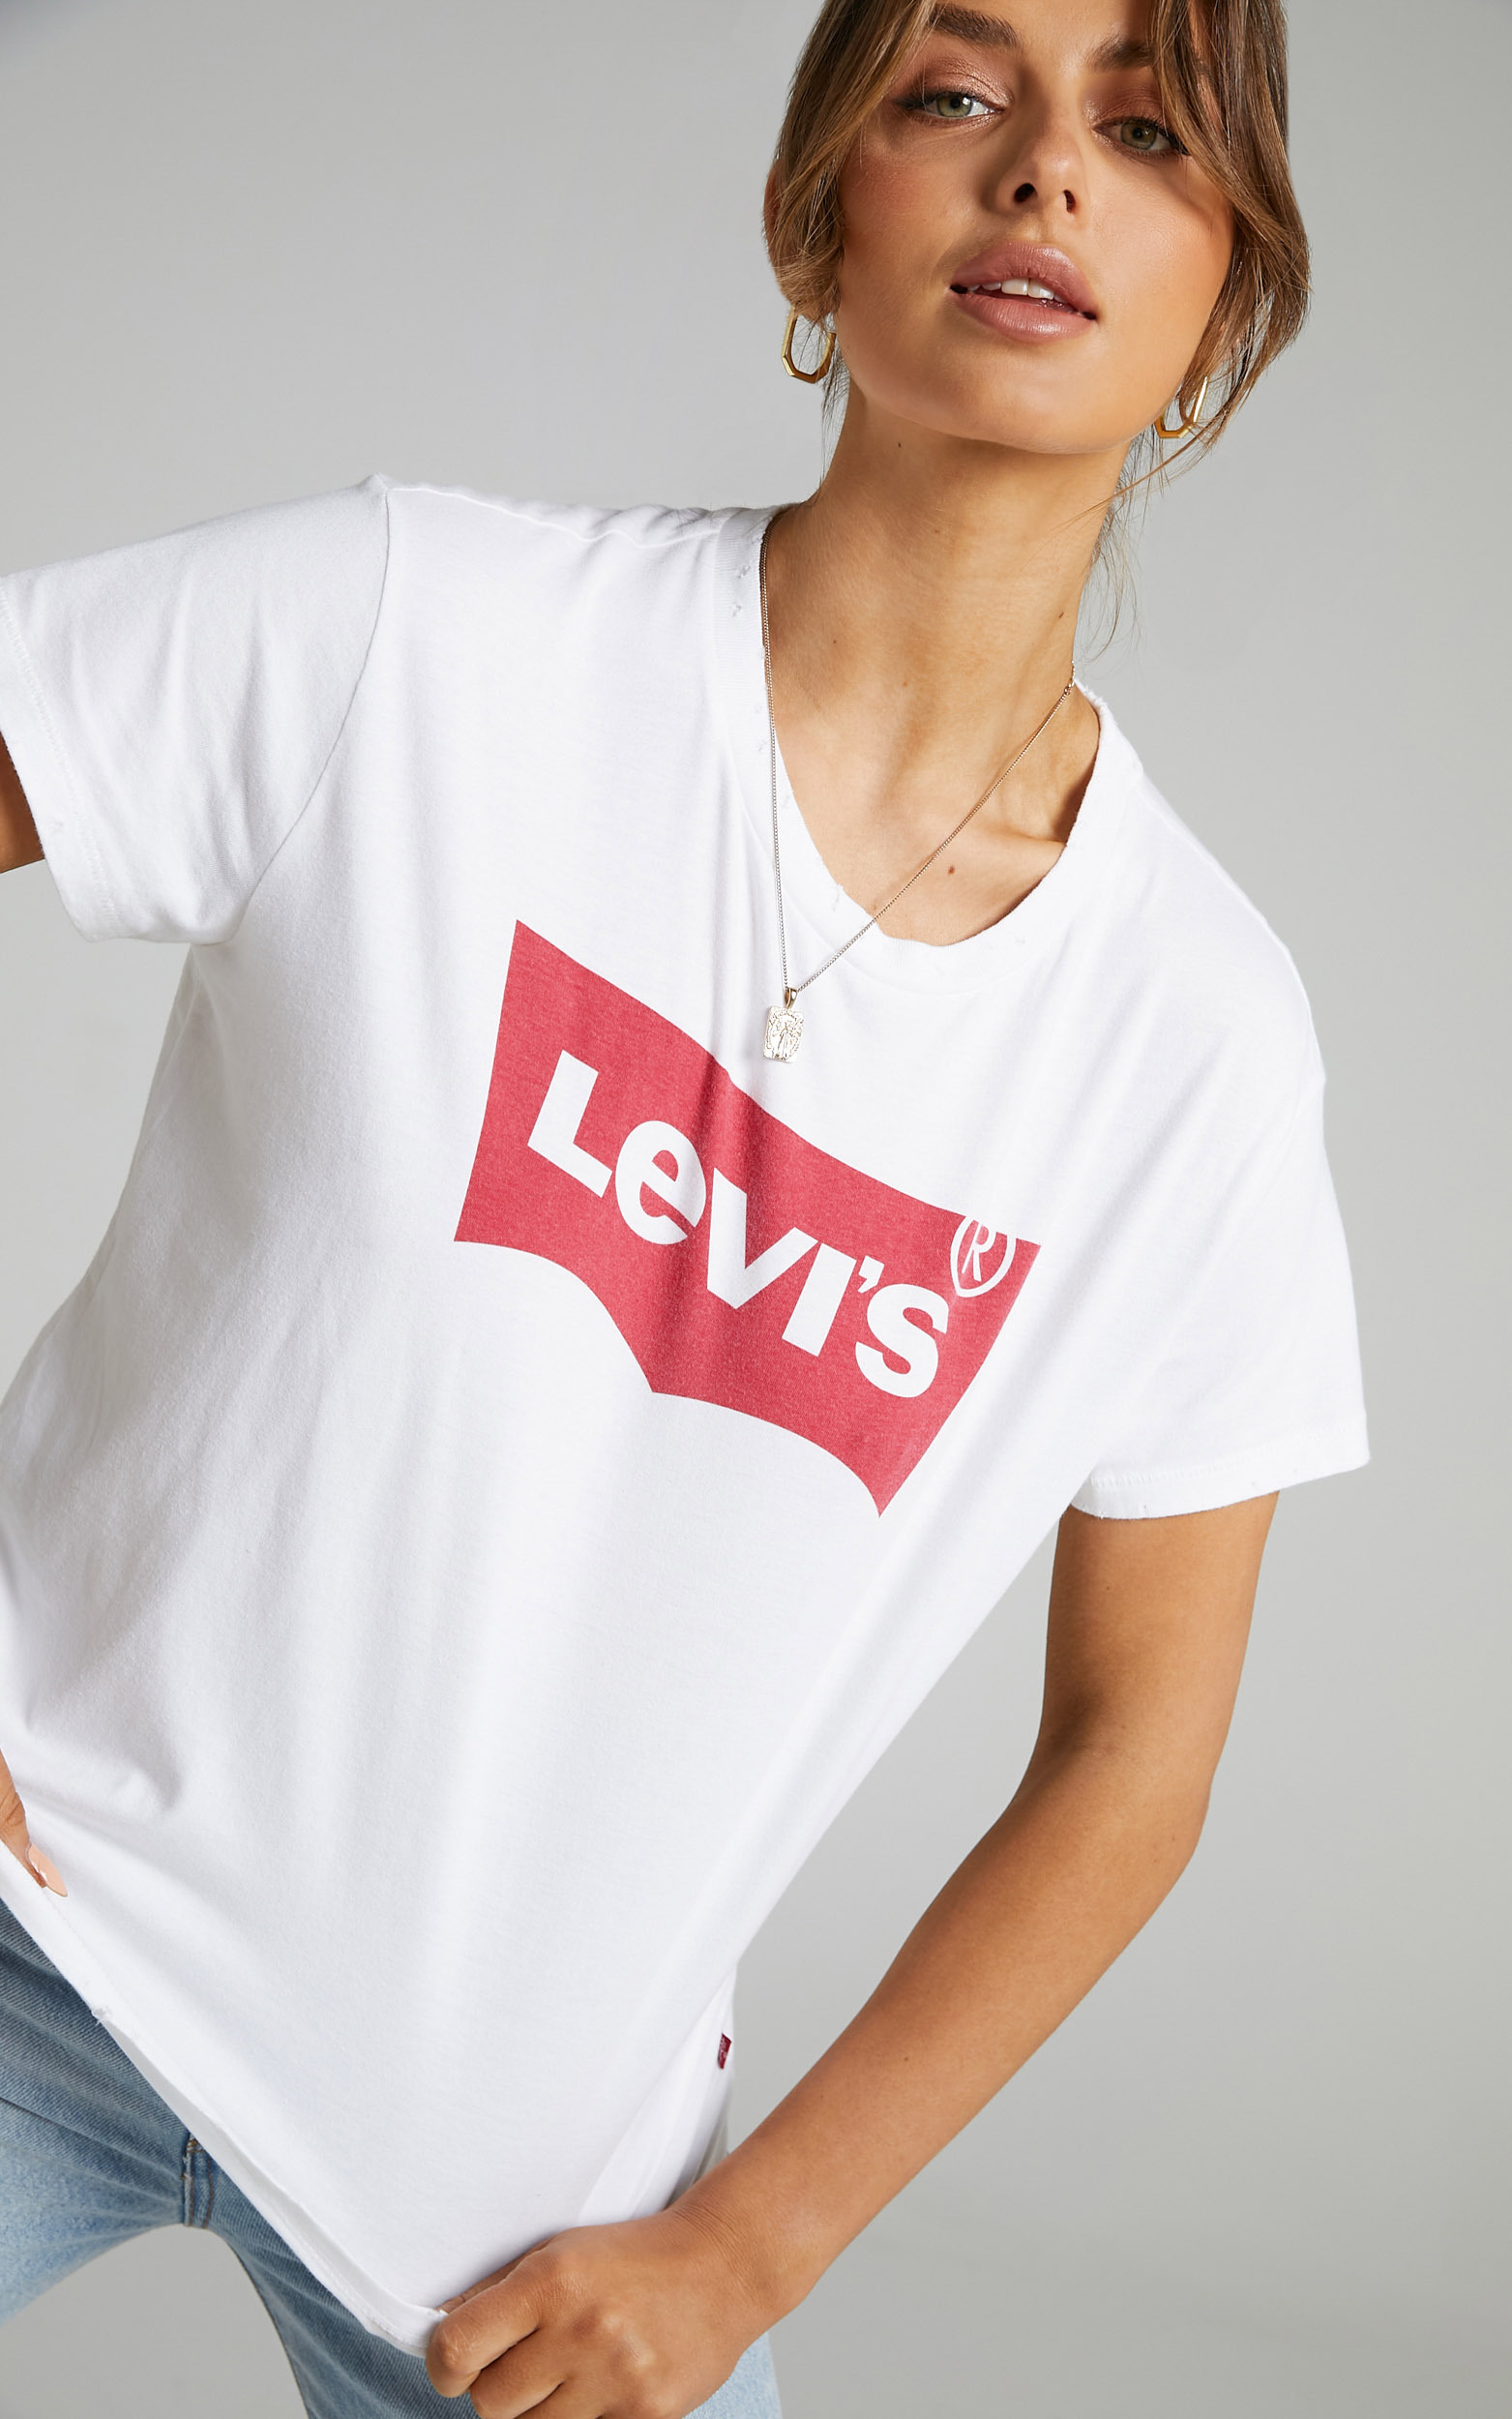 Levi's - Vintage Authentic Tee in Vintage White - L, WHT1, hi-res image number null